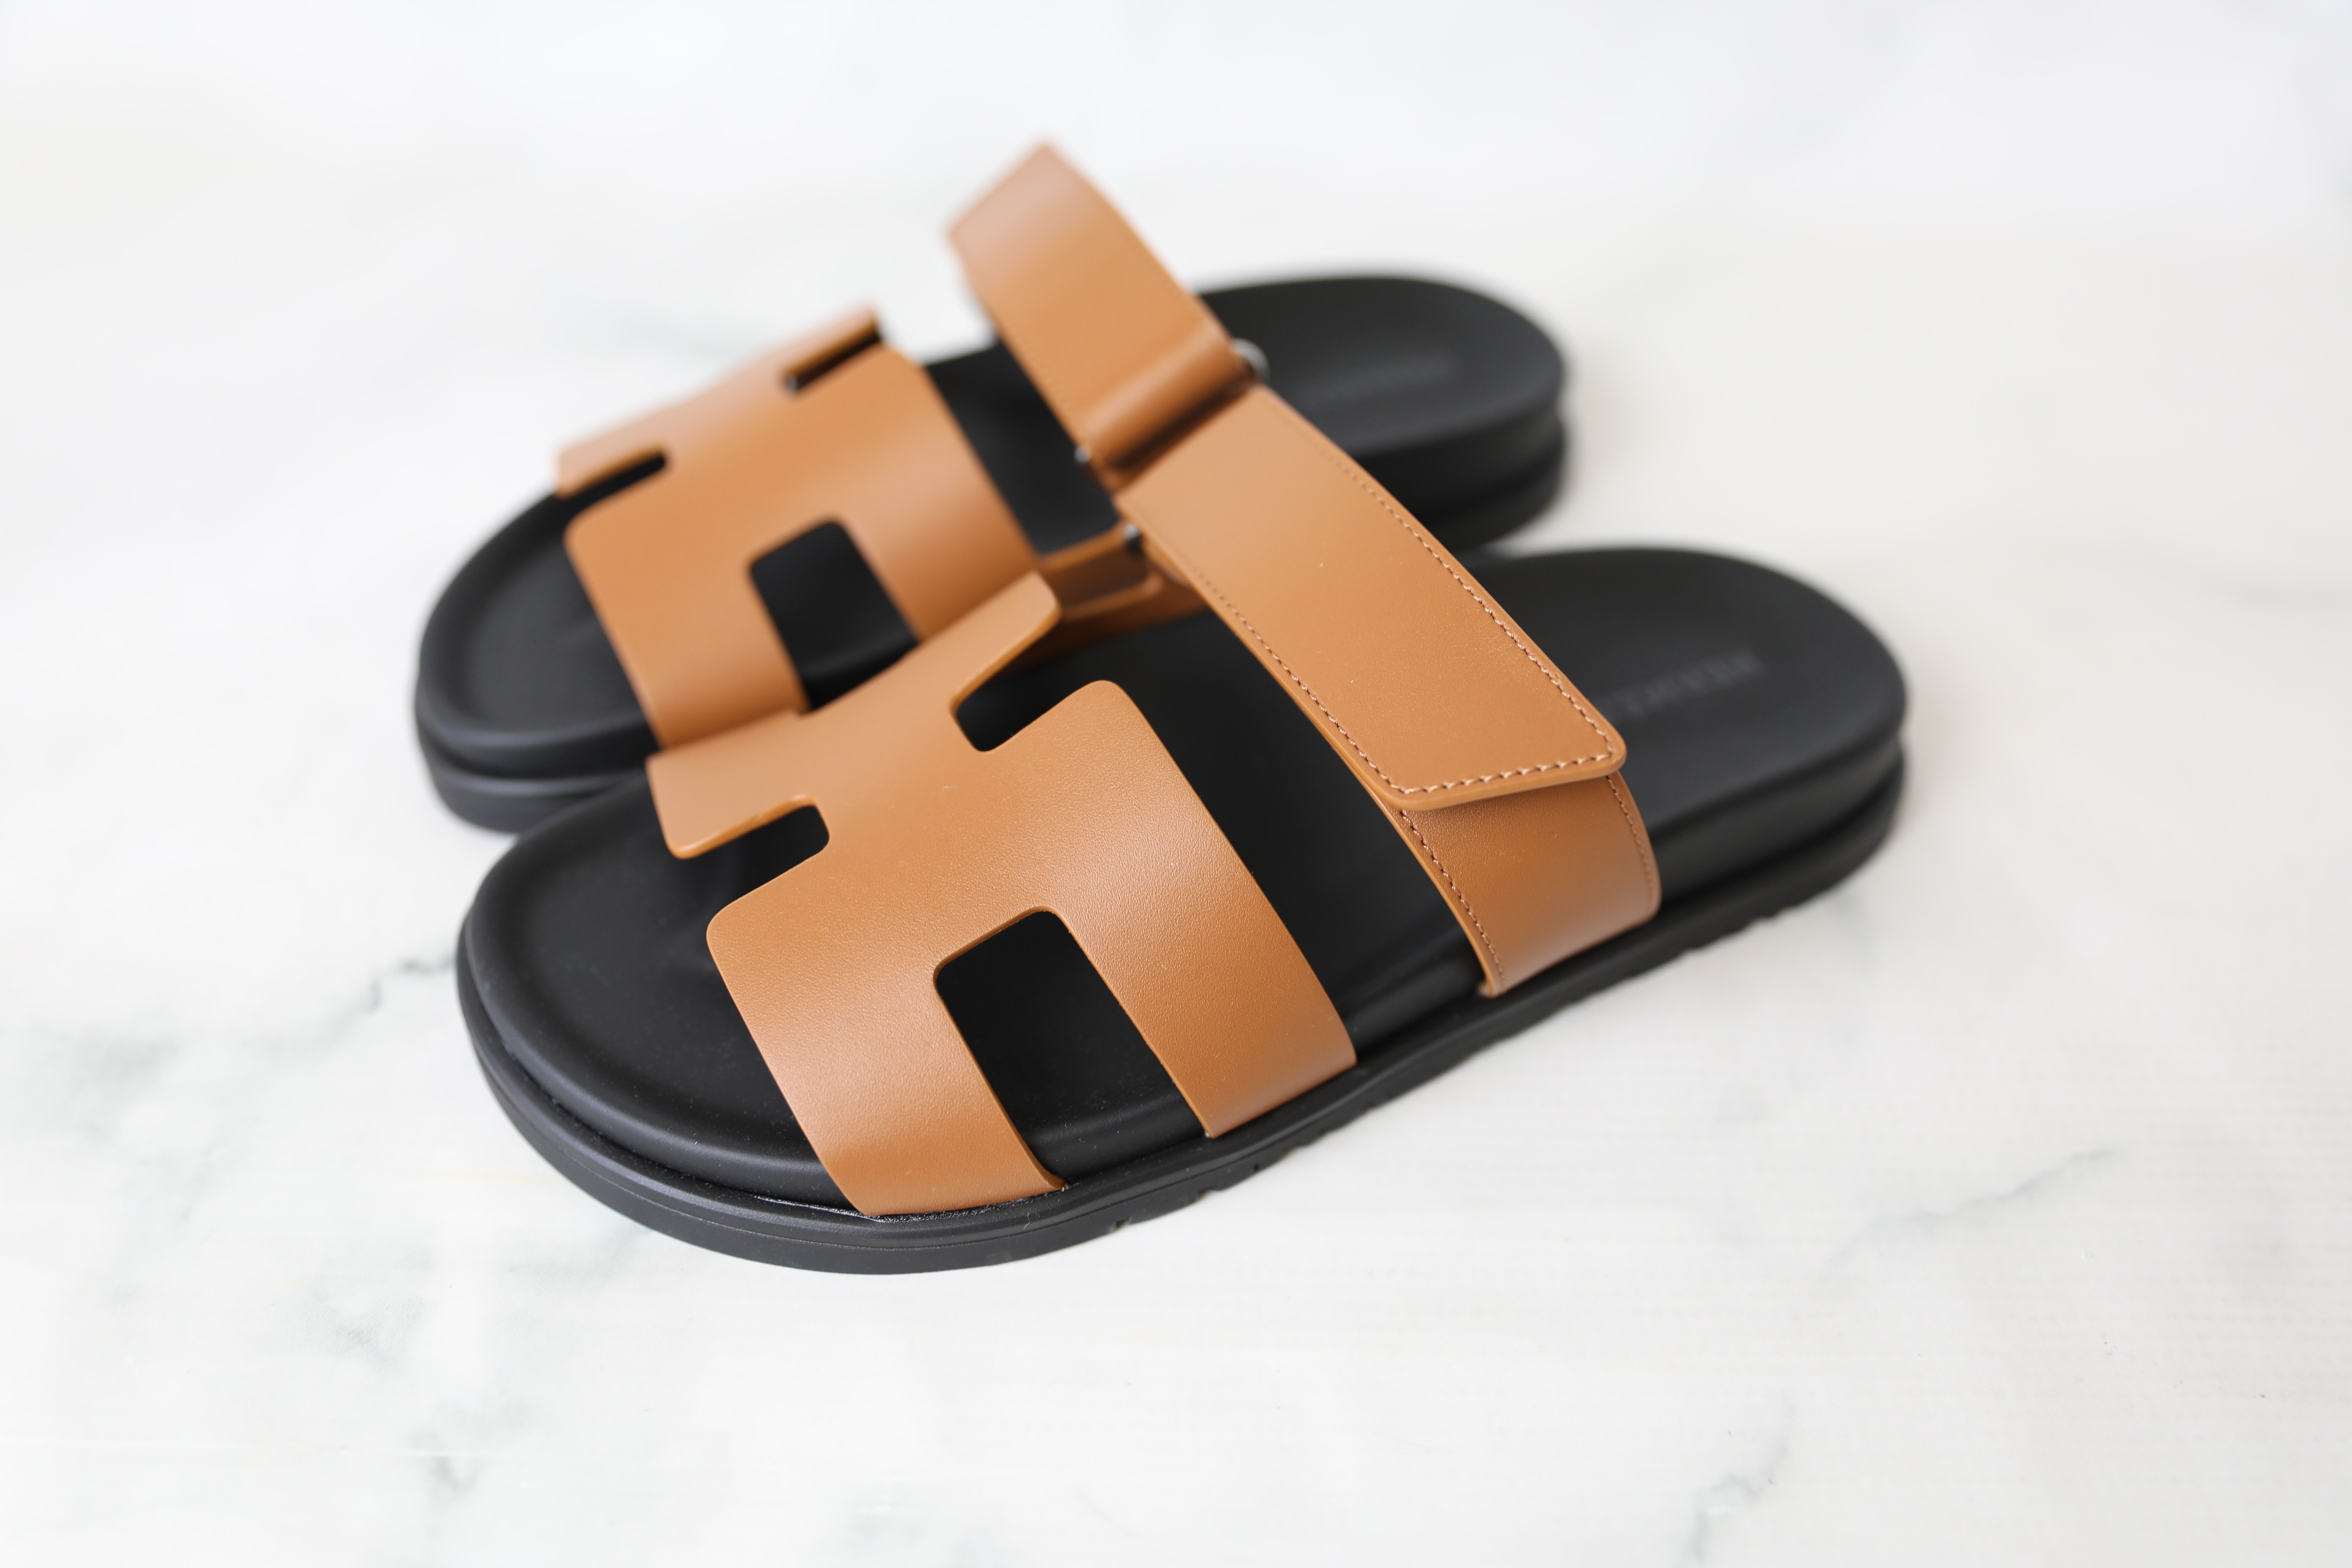 Hermès Chypre Sandals in Gold Size 37 – Coco Approved Studio